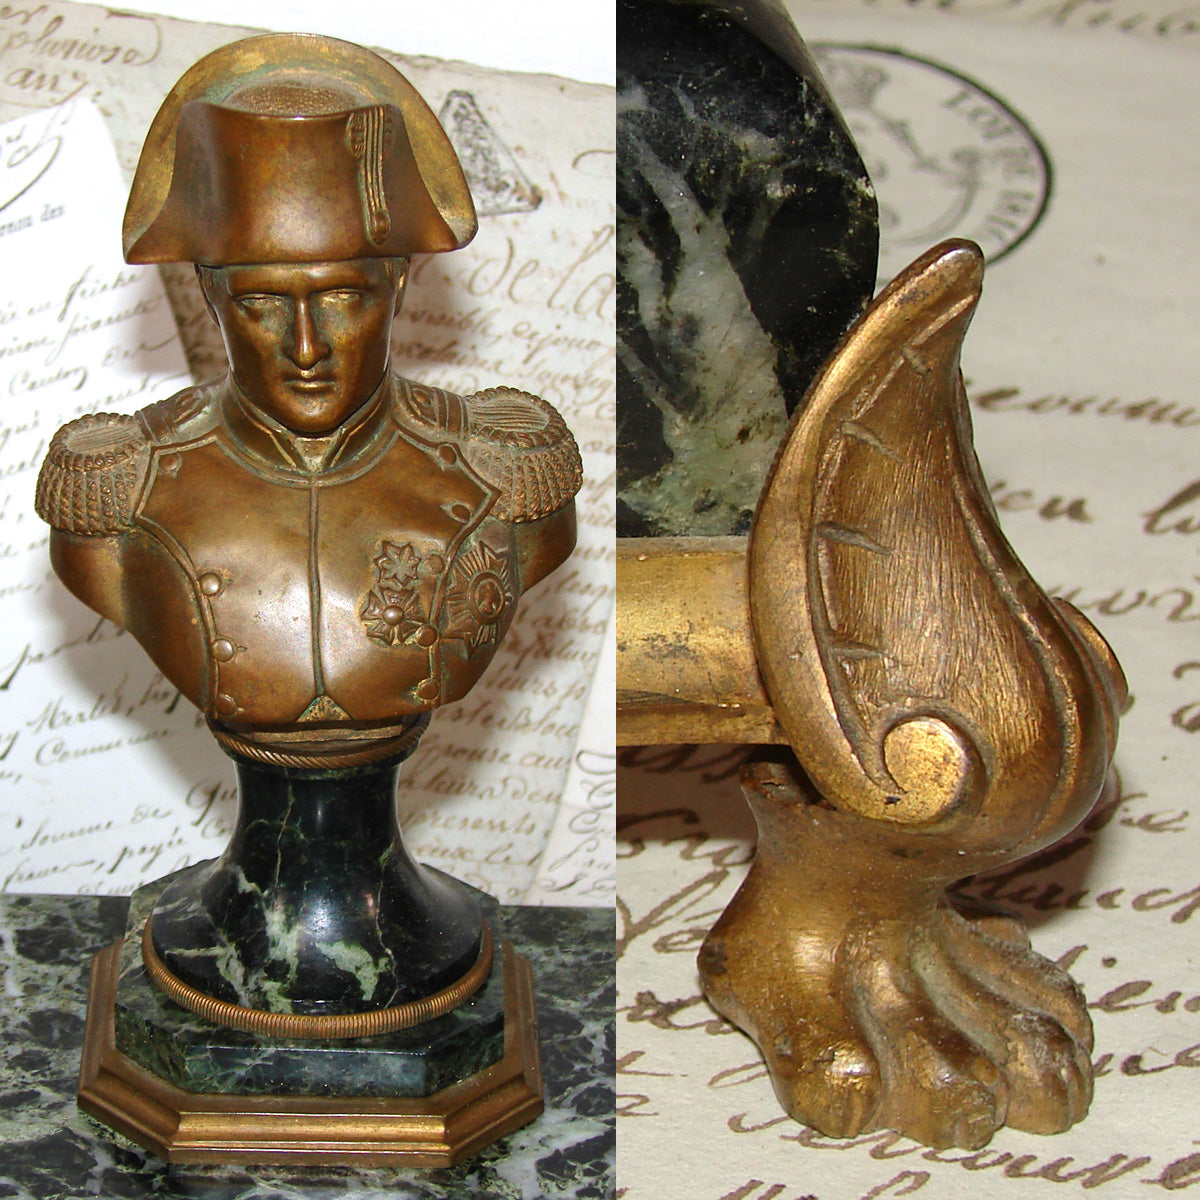 Huge Antique French 15" Writer's Stand, Double Inkwell, Empire Revival with Swans & Canova Marked Bust of Napoleon